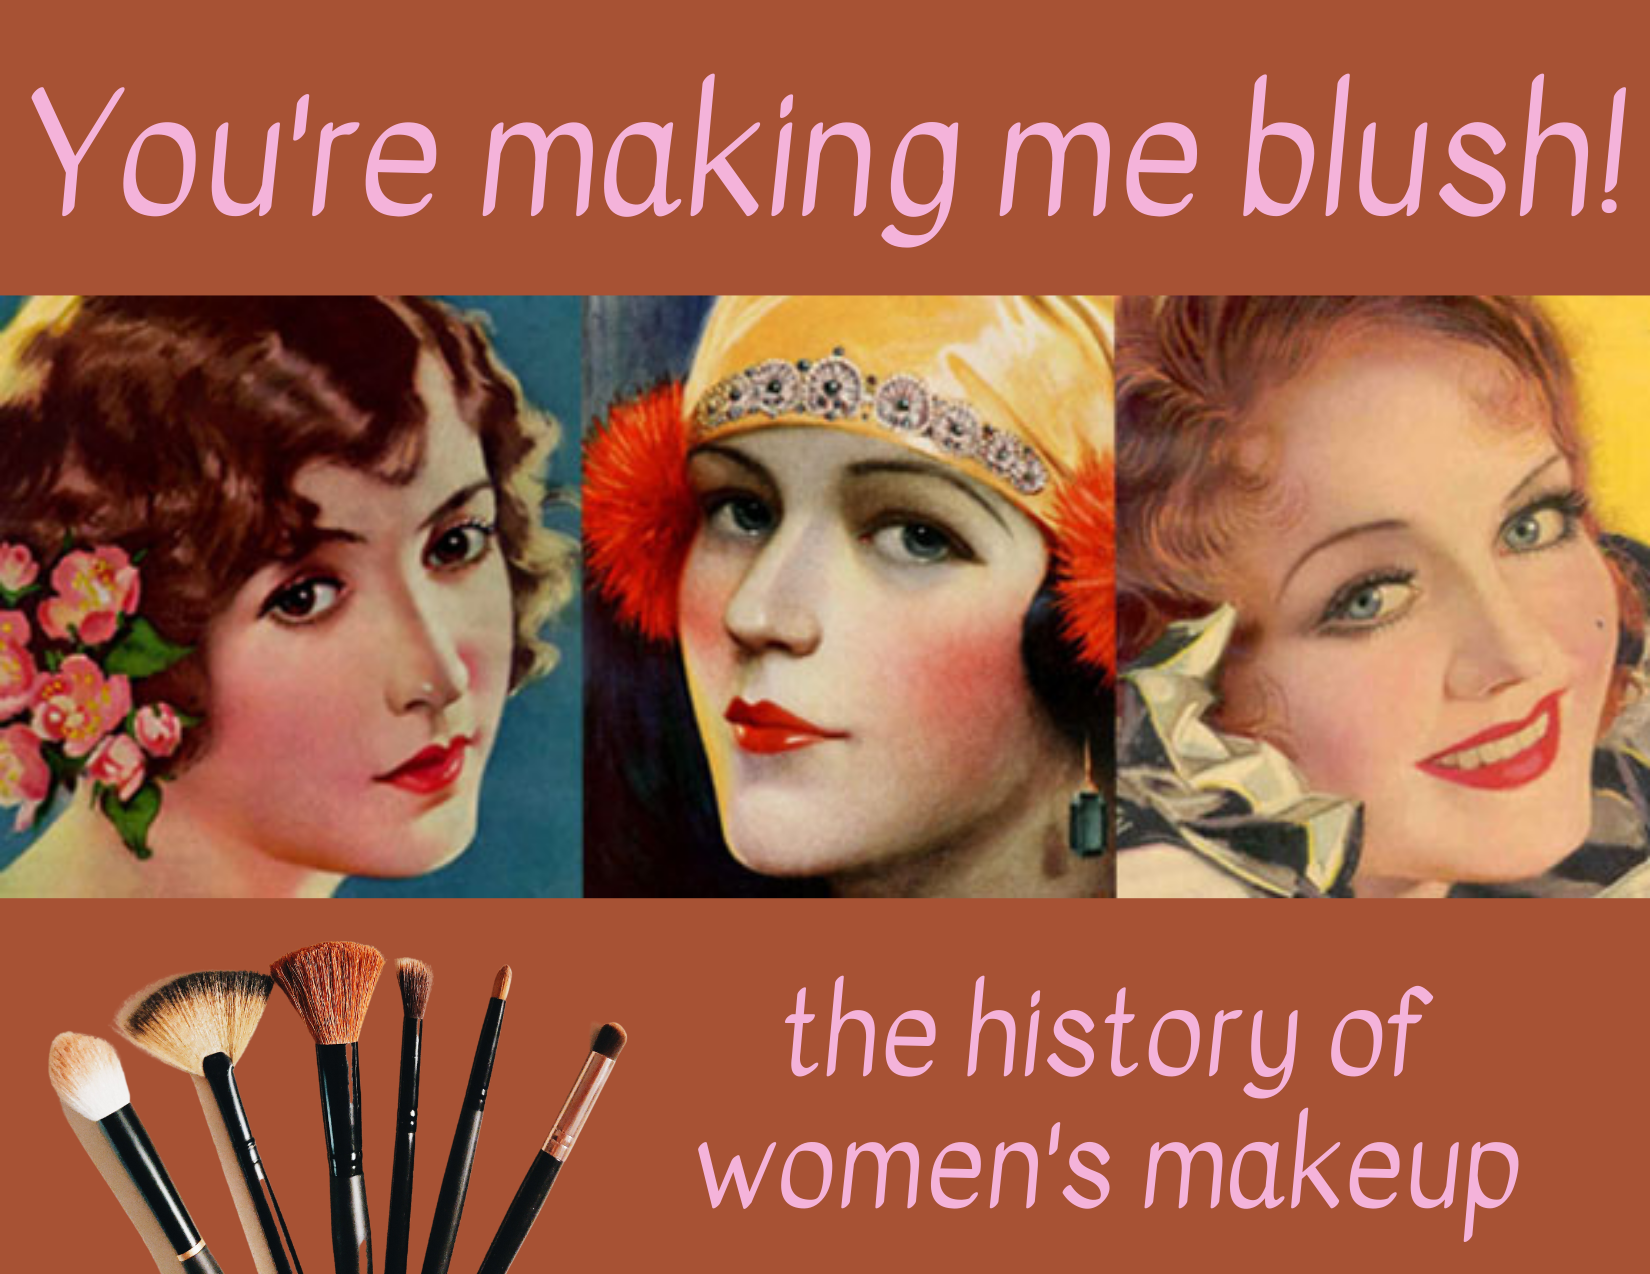 You're making me blush! the history of women's makeup Tuesday, March 1 at 6:30 pm, Zoom